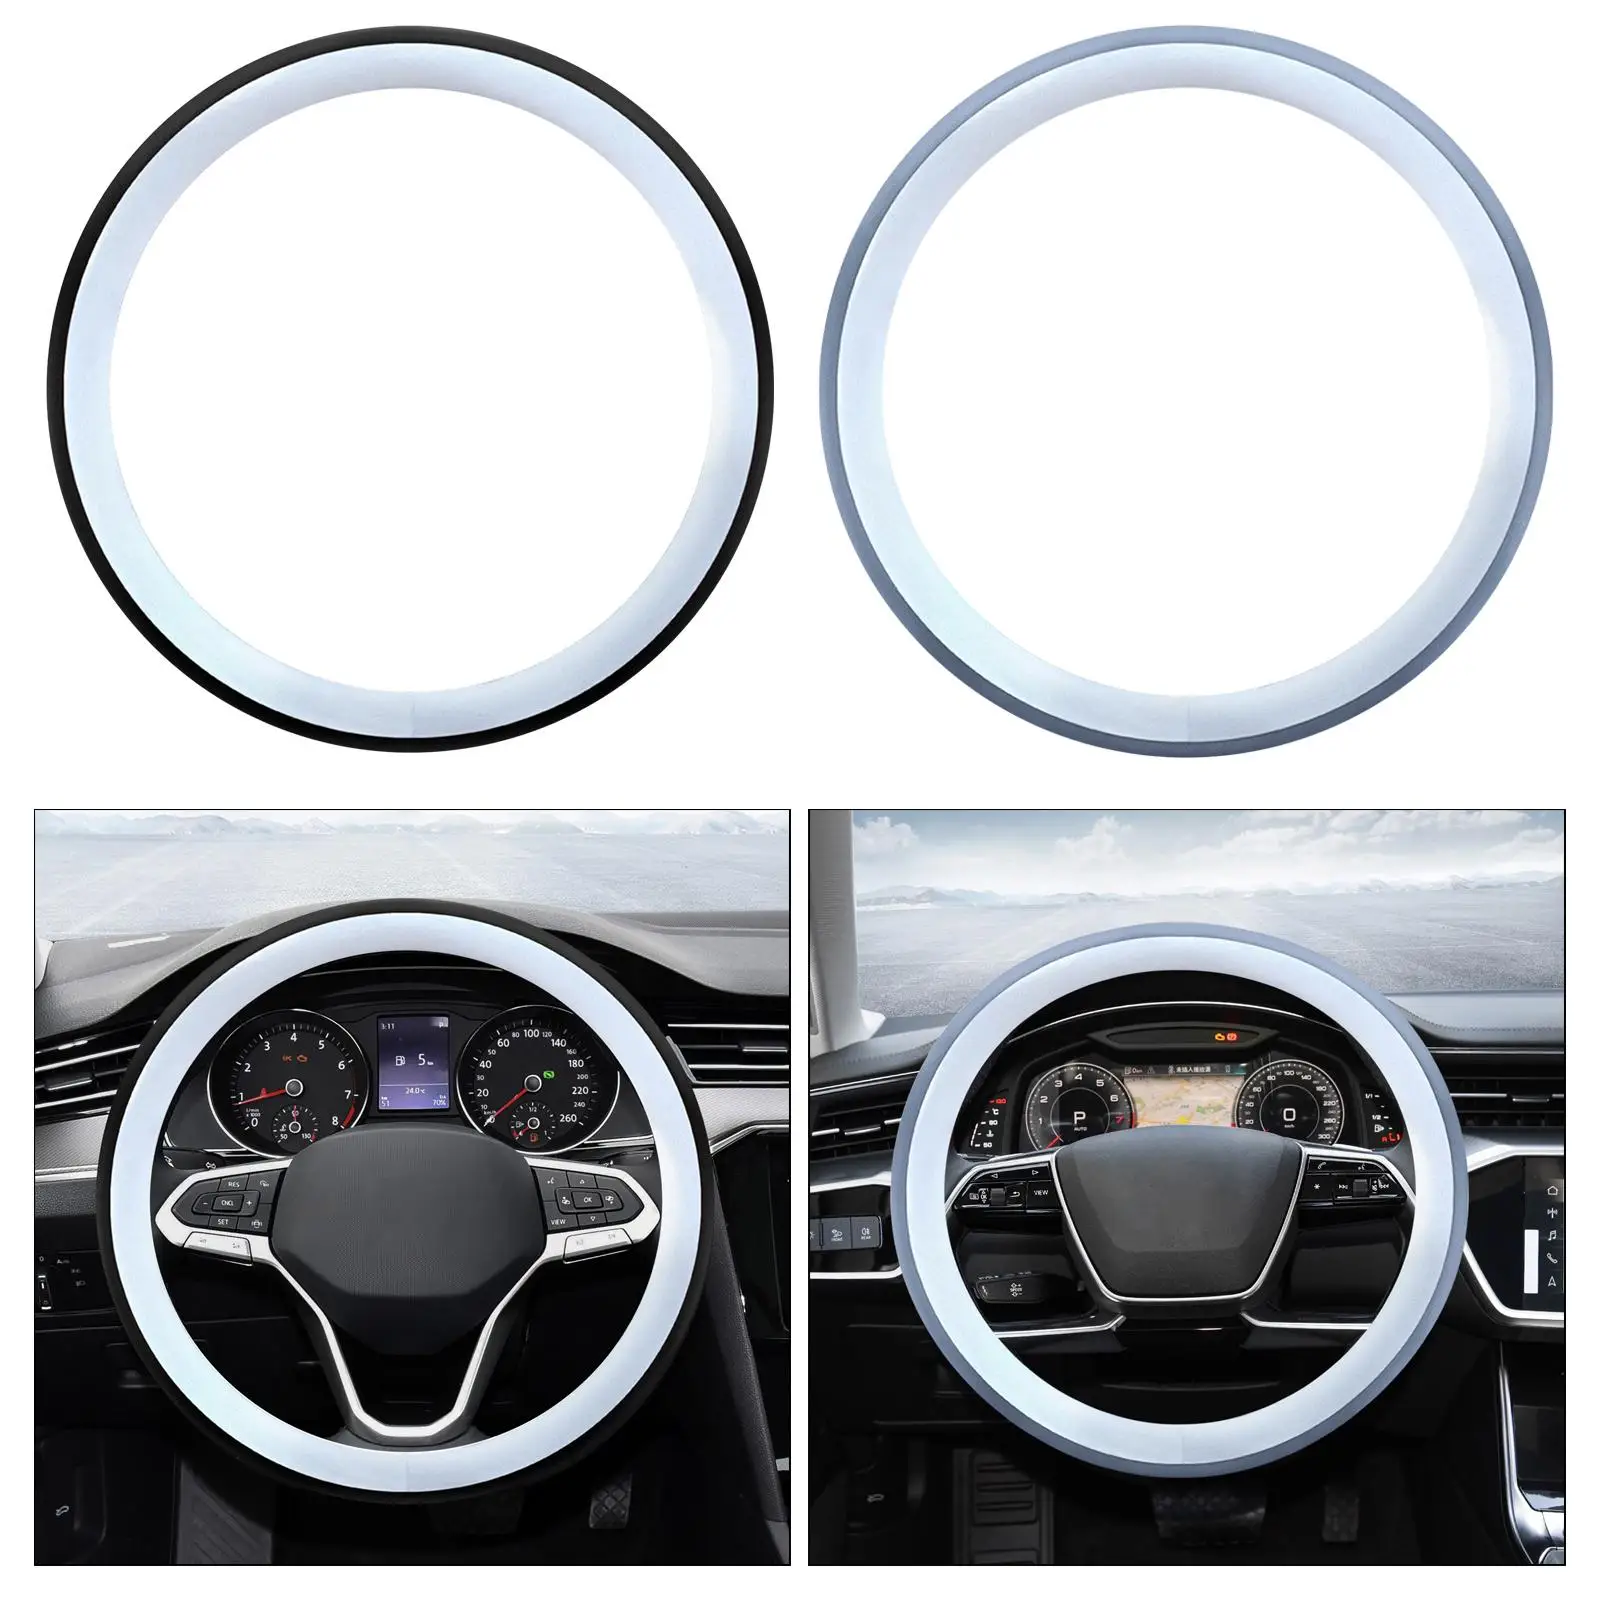 38cm Steering Wheel Cover Protector Interior Decoration Wear Resistant Easily Install Anti Slip Breathable Soft Plush Round